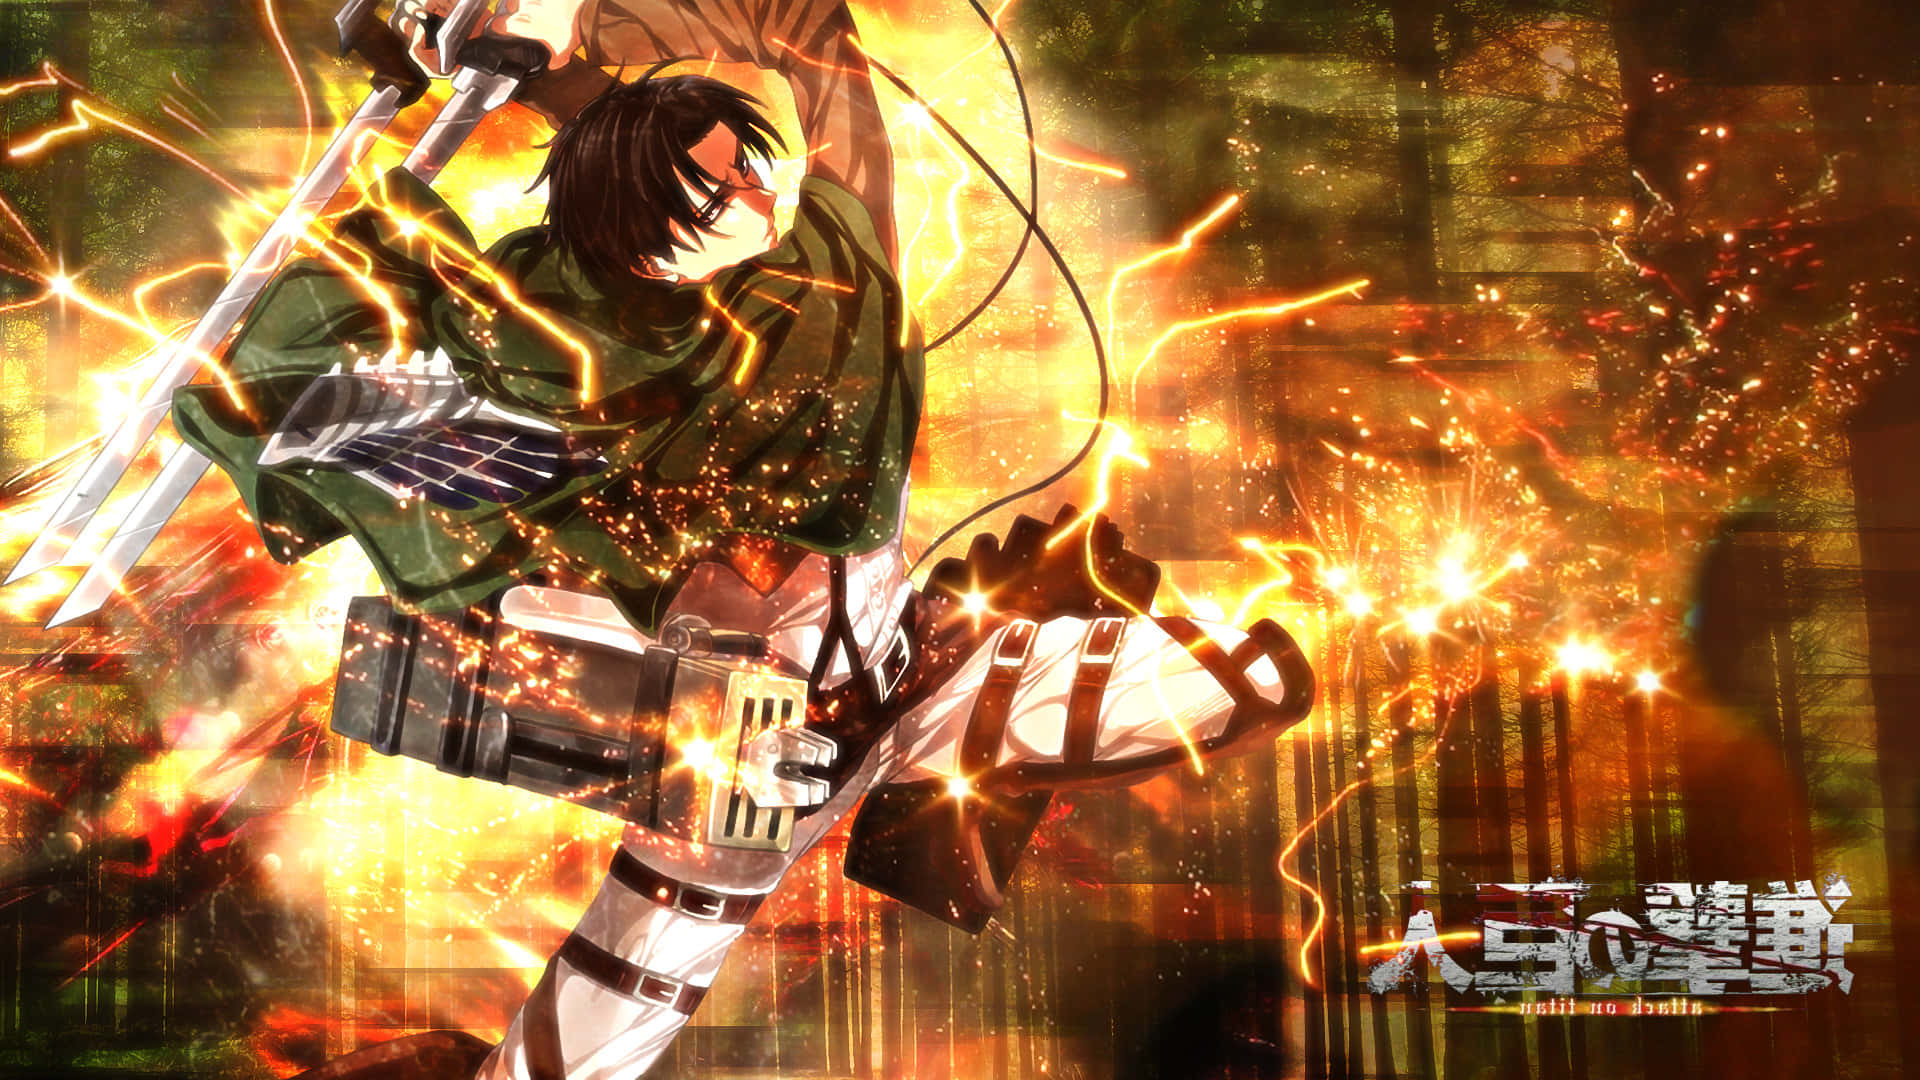 Experience the thrilling battle between titans and humans in the Attack on Titan video game. Wallpaper